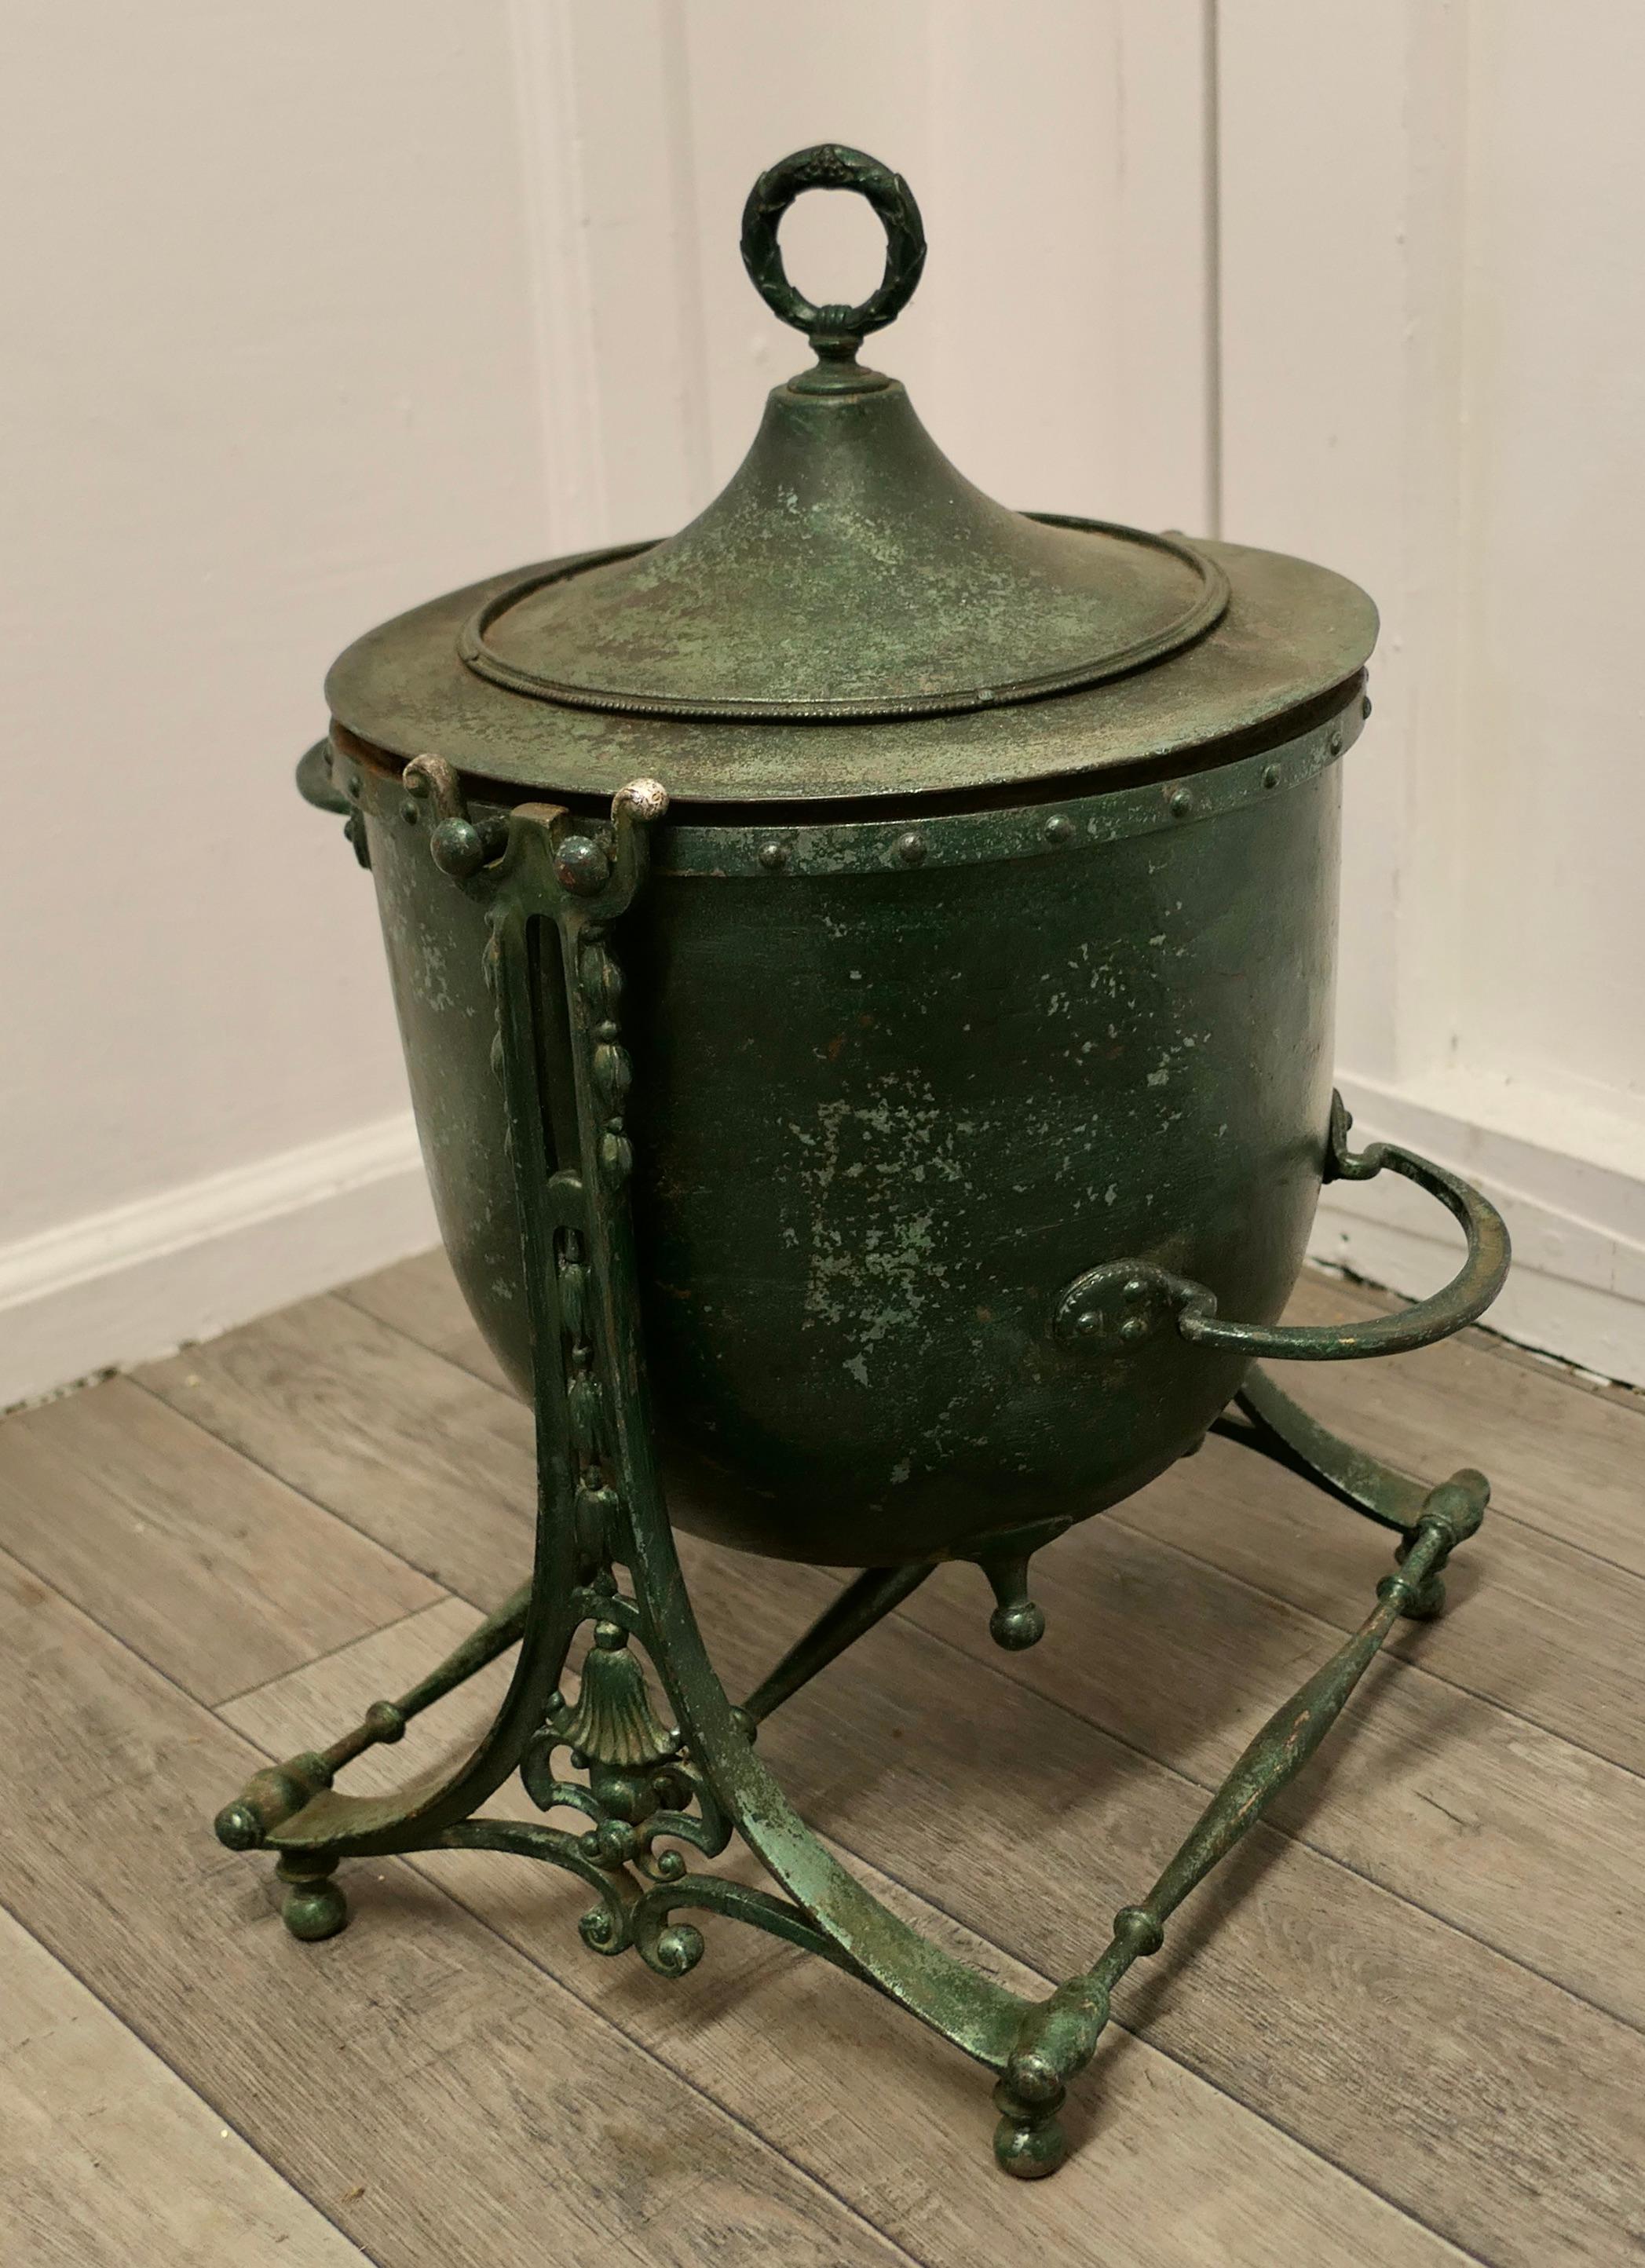 https://a.1stdibscdn.com/large-19th-century-iron-pot-cauldron-on-stand-for-sale-picture-2/f_24983/f_330033821677491268919/P1060455_master.JPG